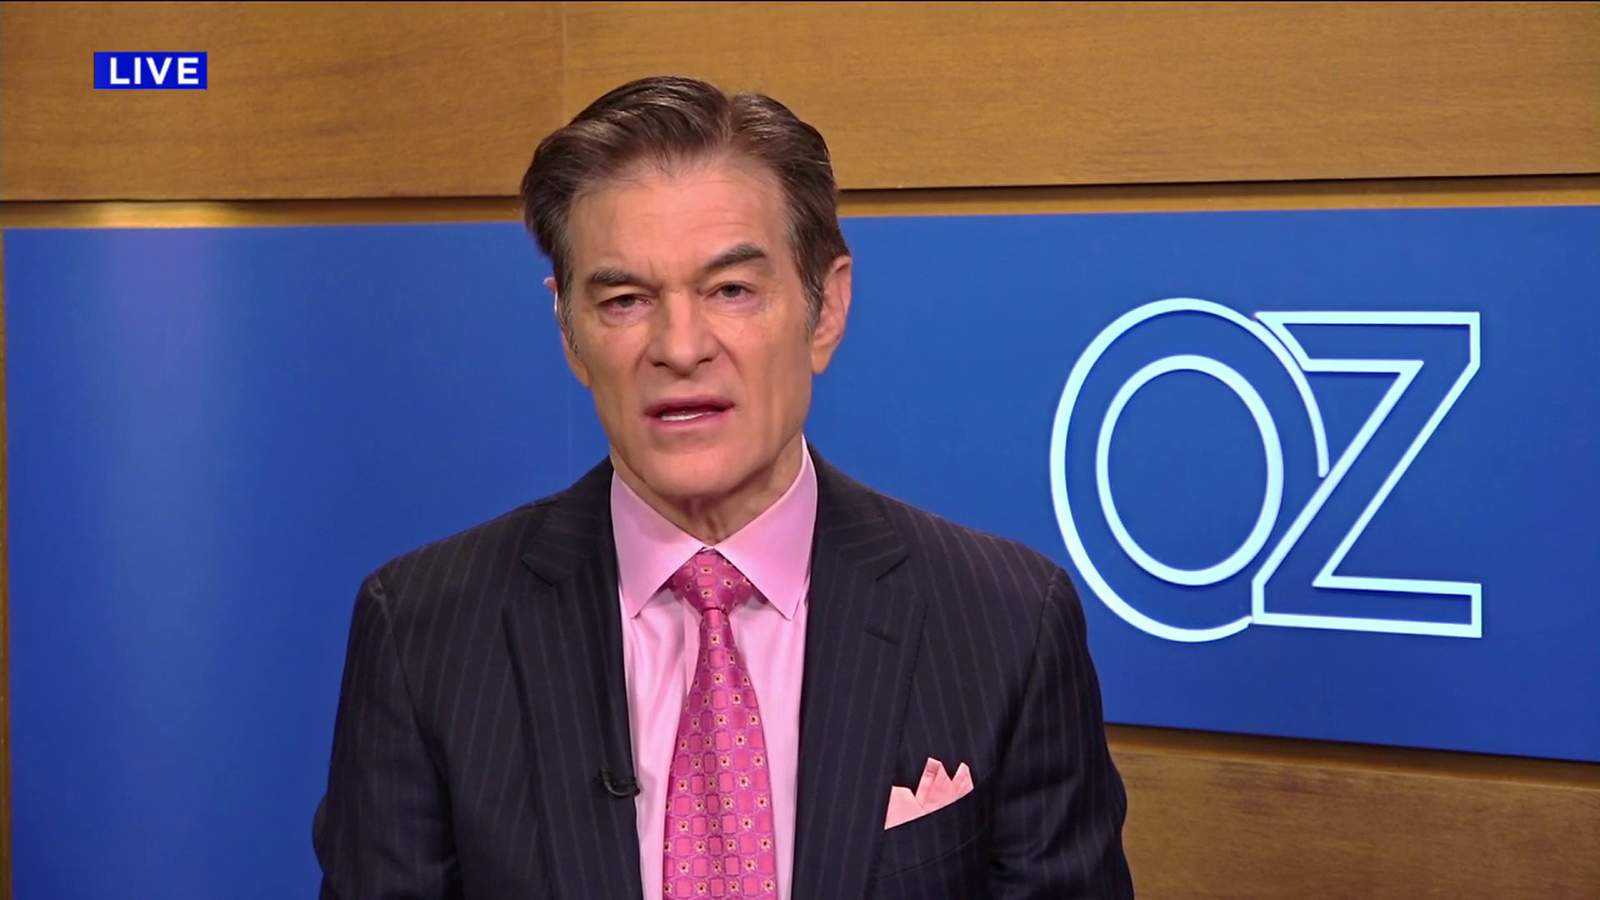 Dr. Oz says fully vaccinated people ‘can do things that other people can’t do’